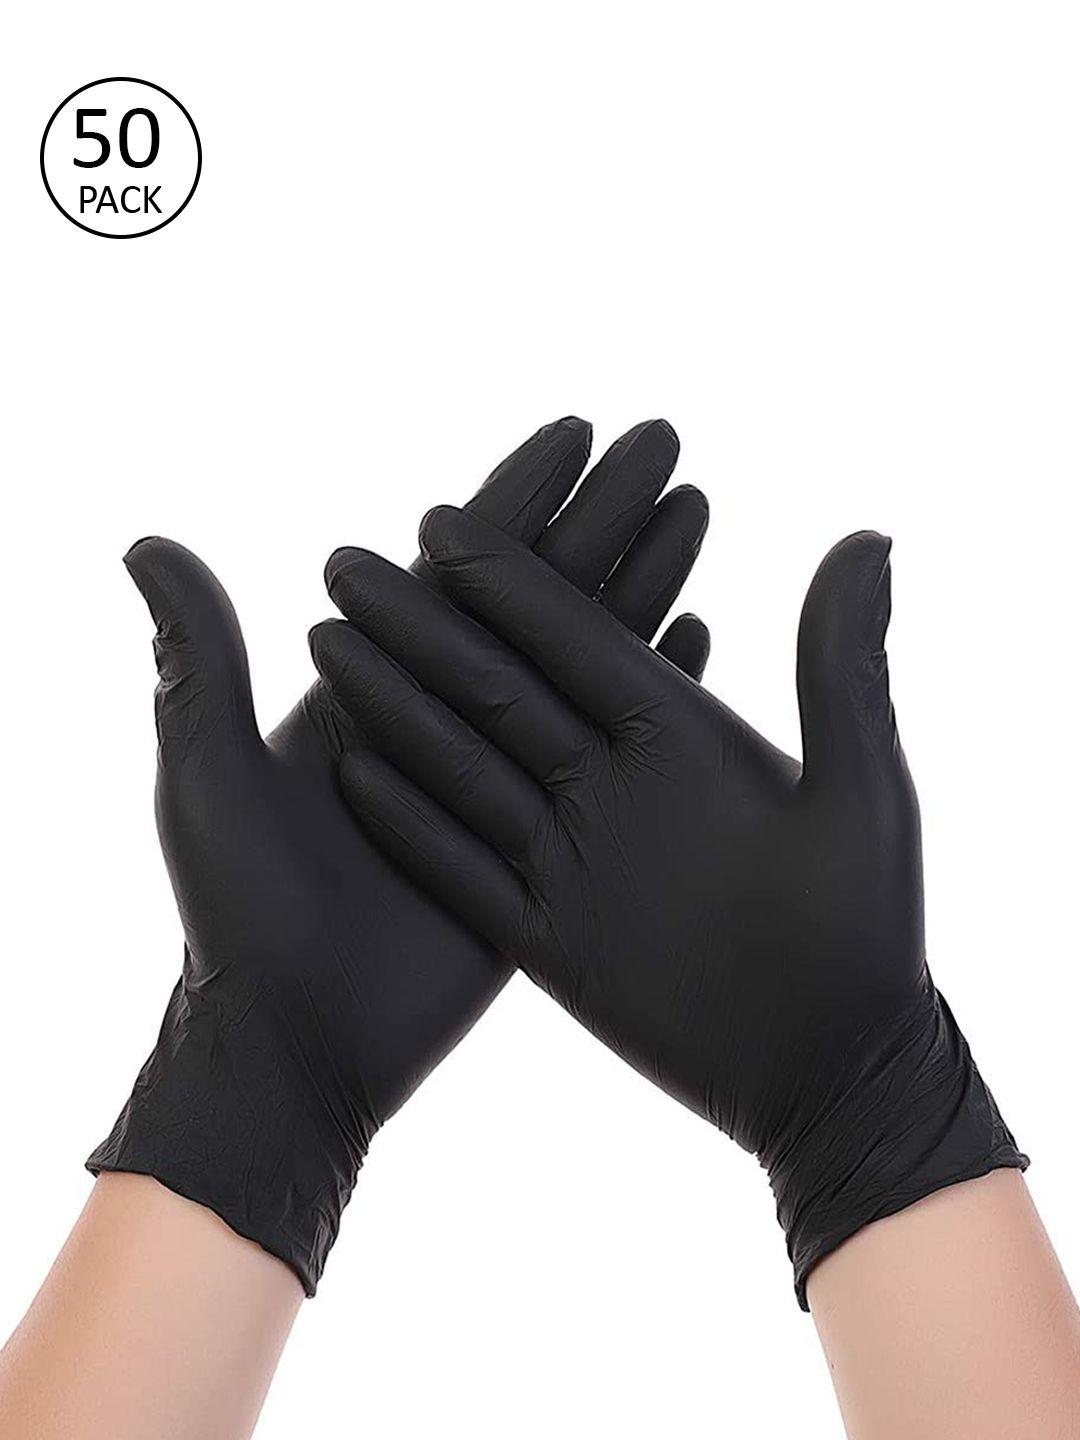 london-fashion-hob-unisex-pack-of-50-black-solid-surgical-disposable-hand-gloves